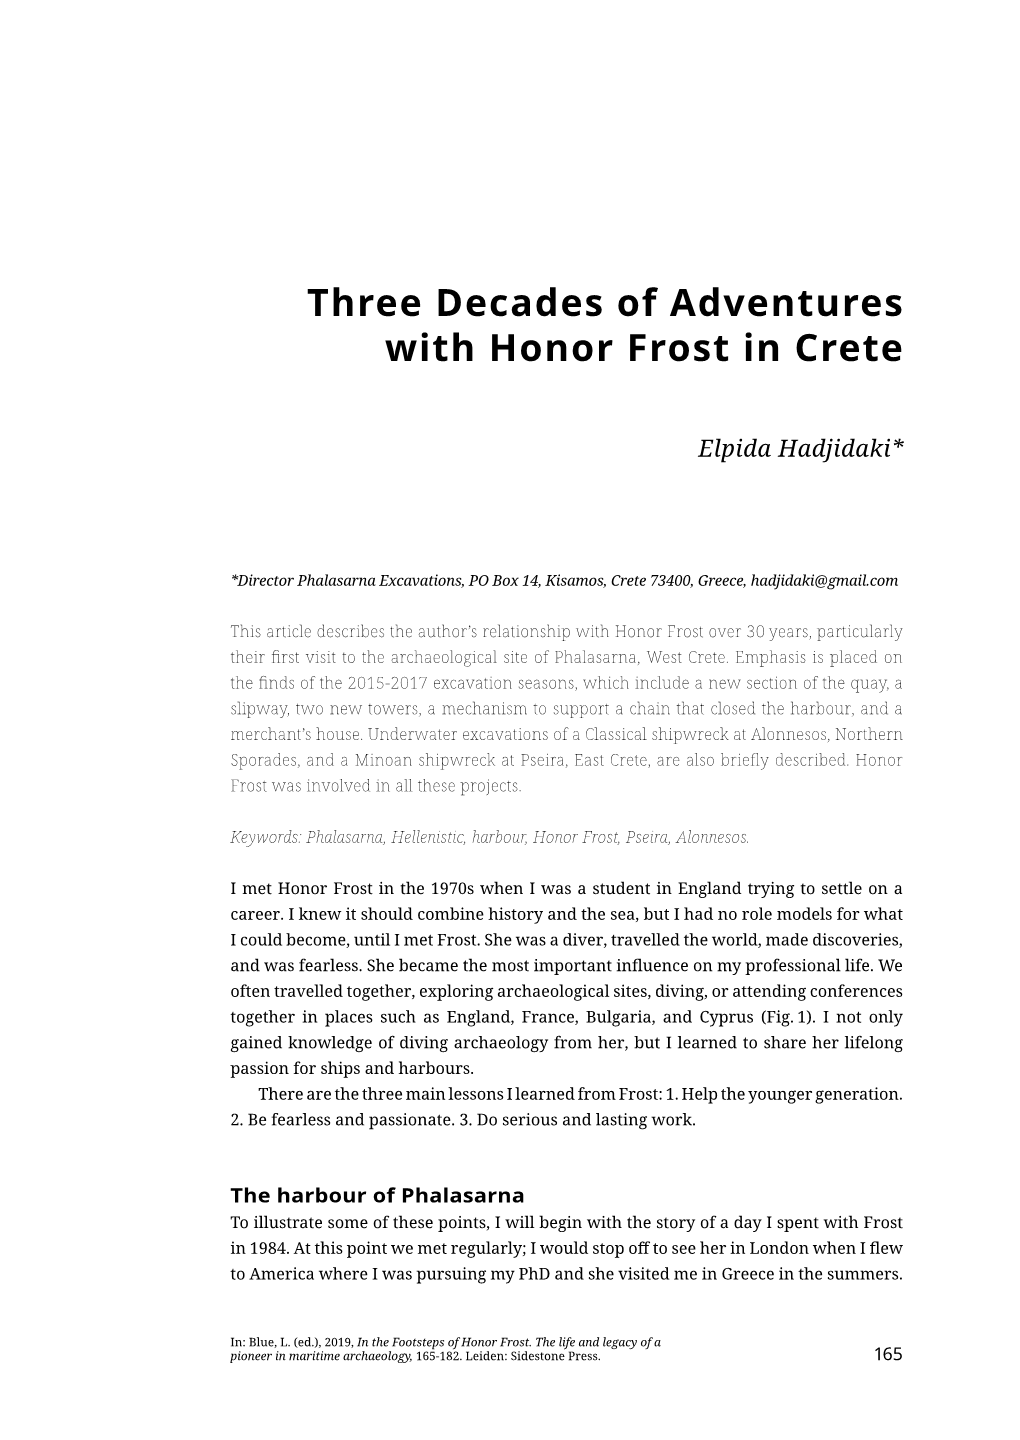 Three Decades of Adventures with Honor Frost in Crete